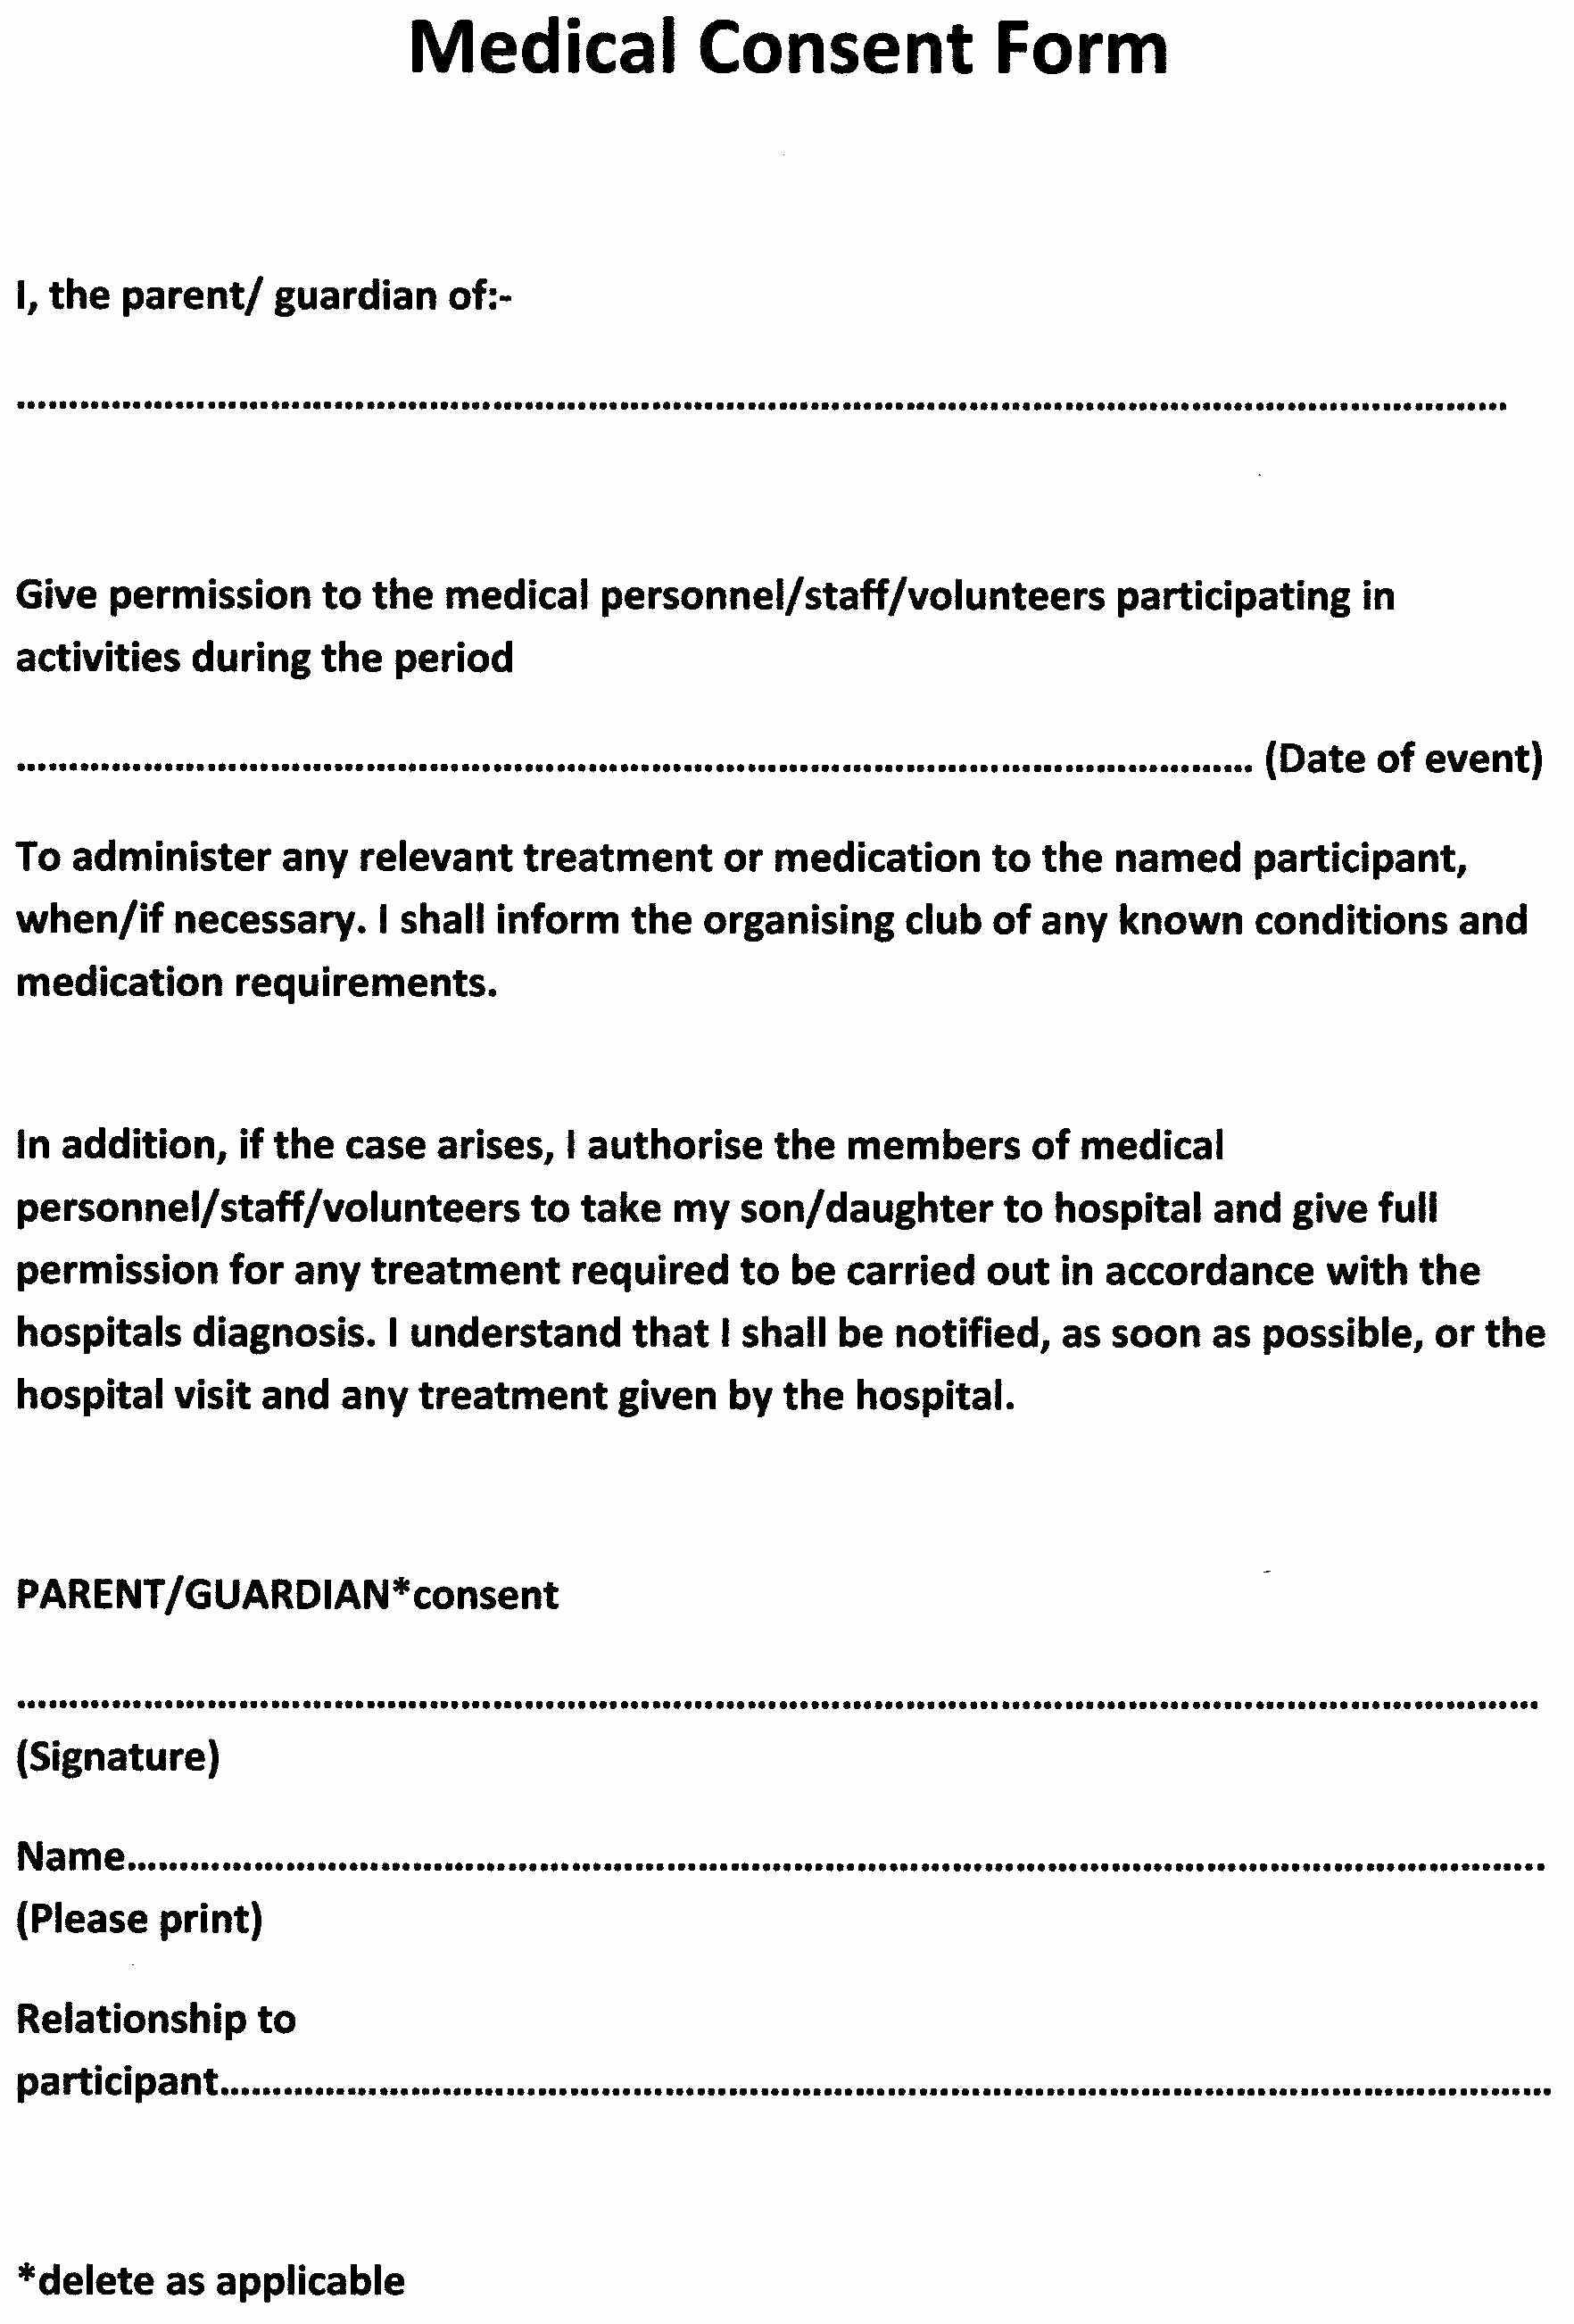 Consent to Treat form Template Elegant Consent form Free Printable Documents